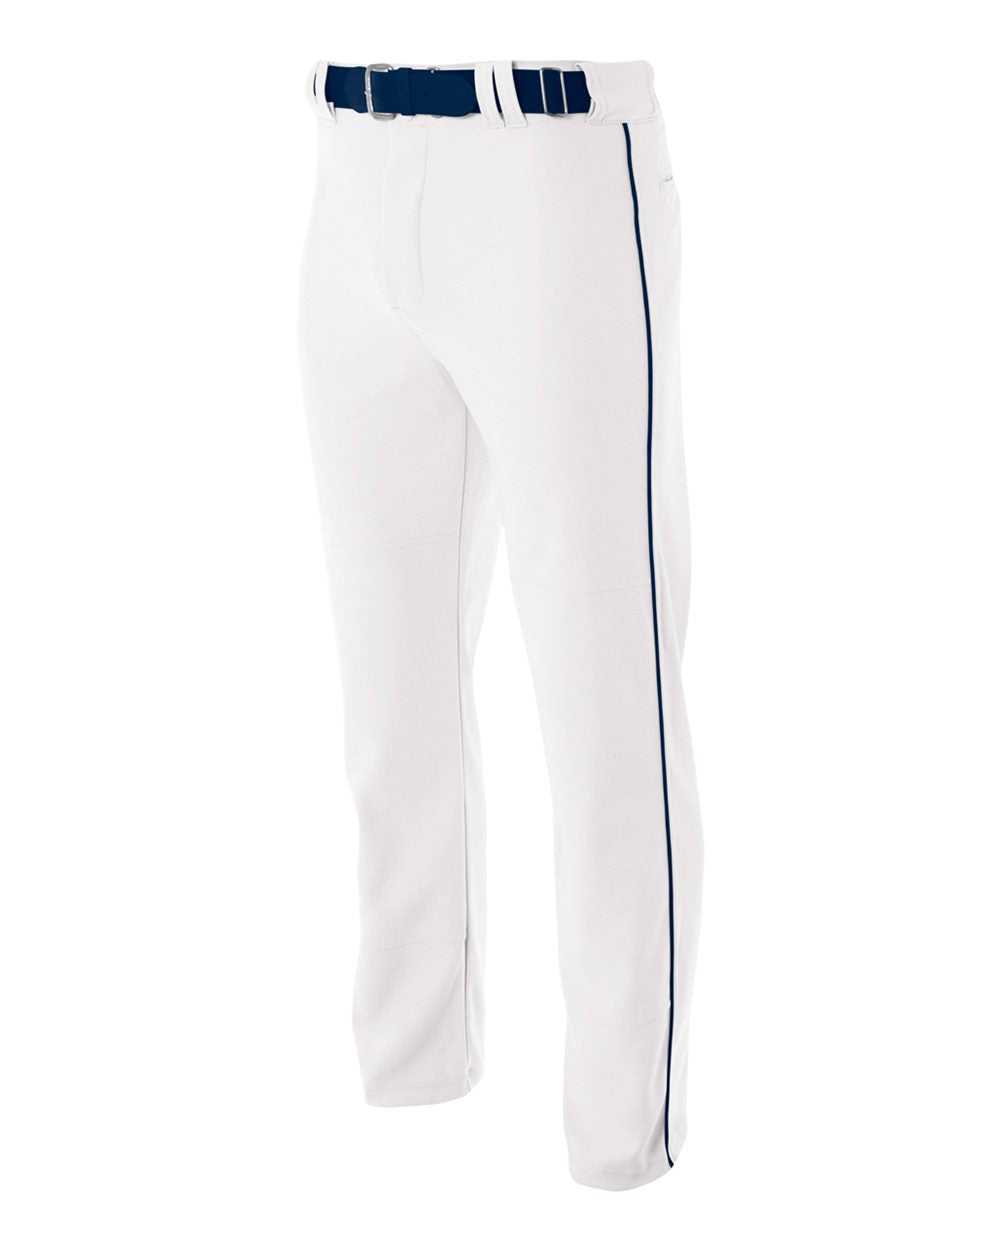 A4 NB6162 Youth Pro Style Open Bottom Baggy Cut Baseball Pant - White Navy - HIT a Double